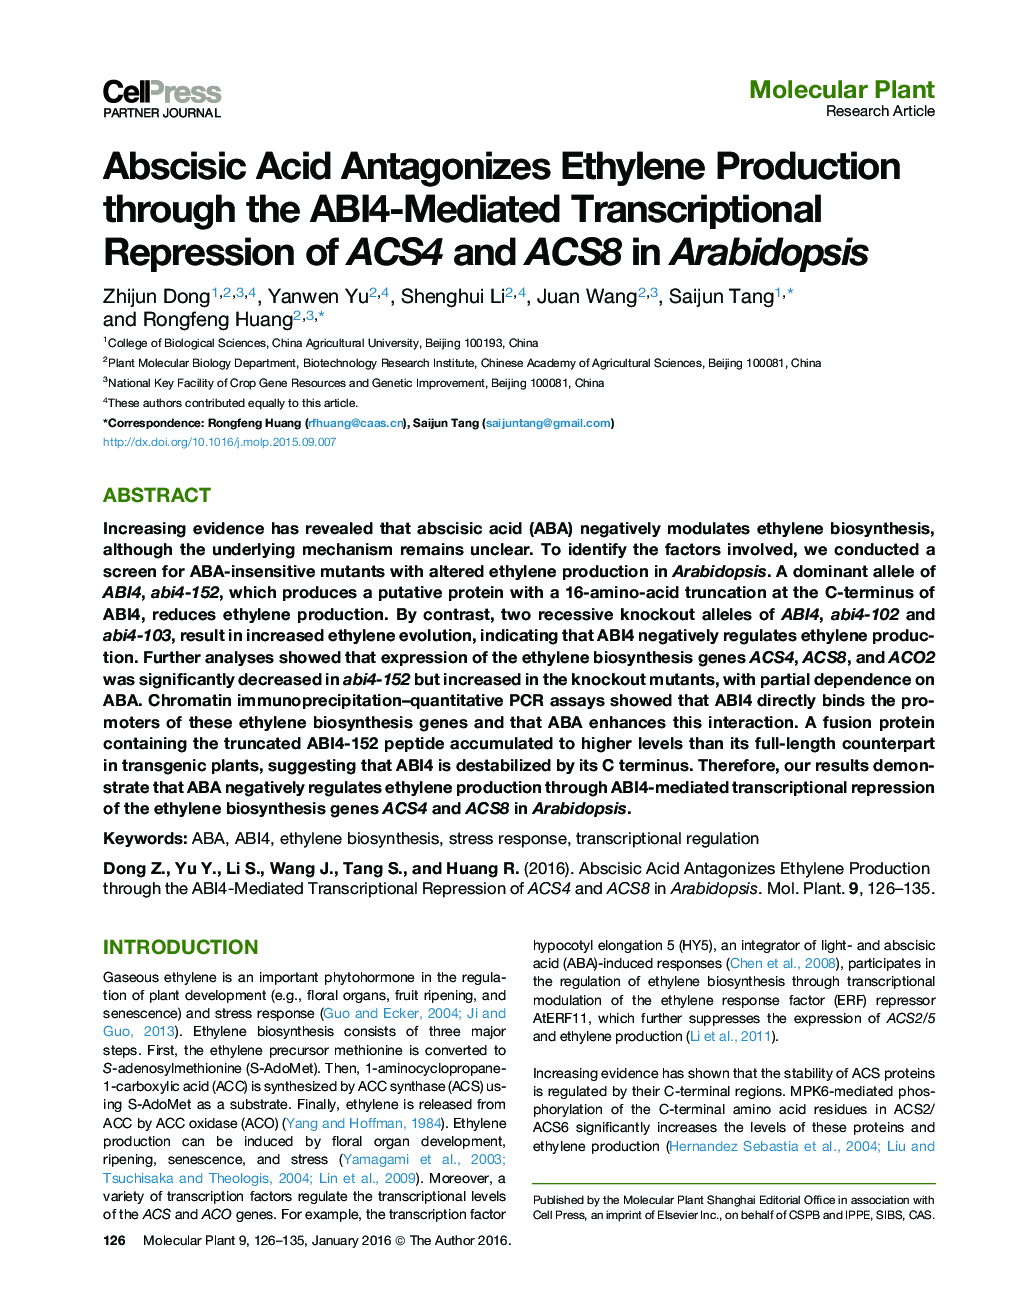 Abscisic Acid Antagonizes Ethylene Production through the ABI4-Mediated Transcriptional Repression of ACS4 and ACS8 in Arabidopsis 